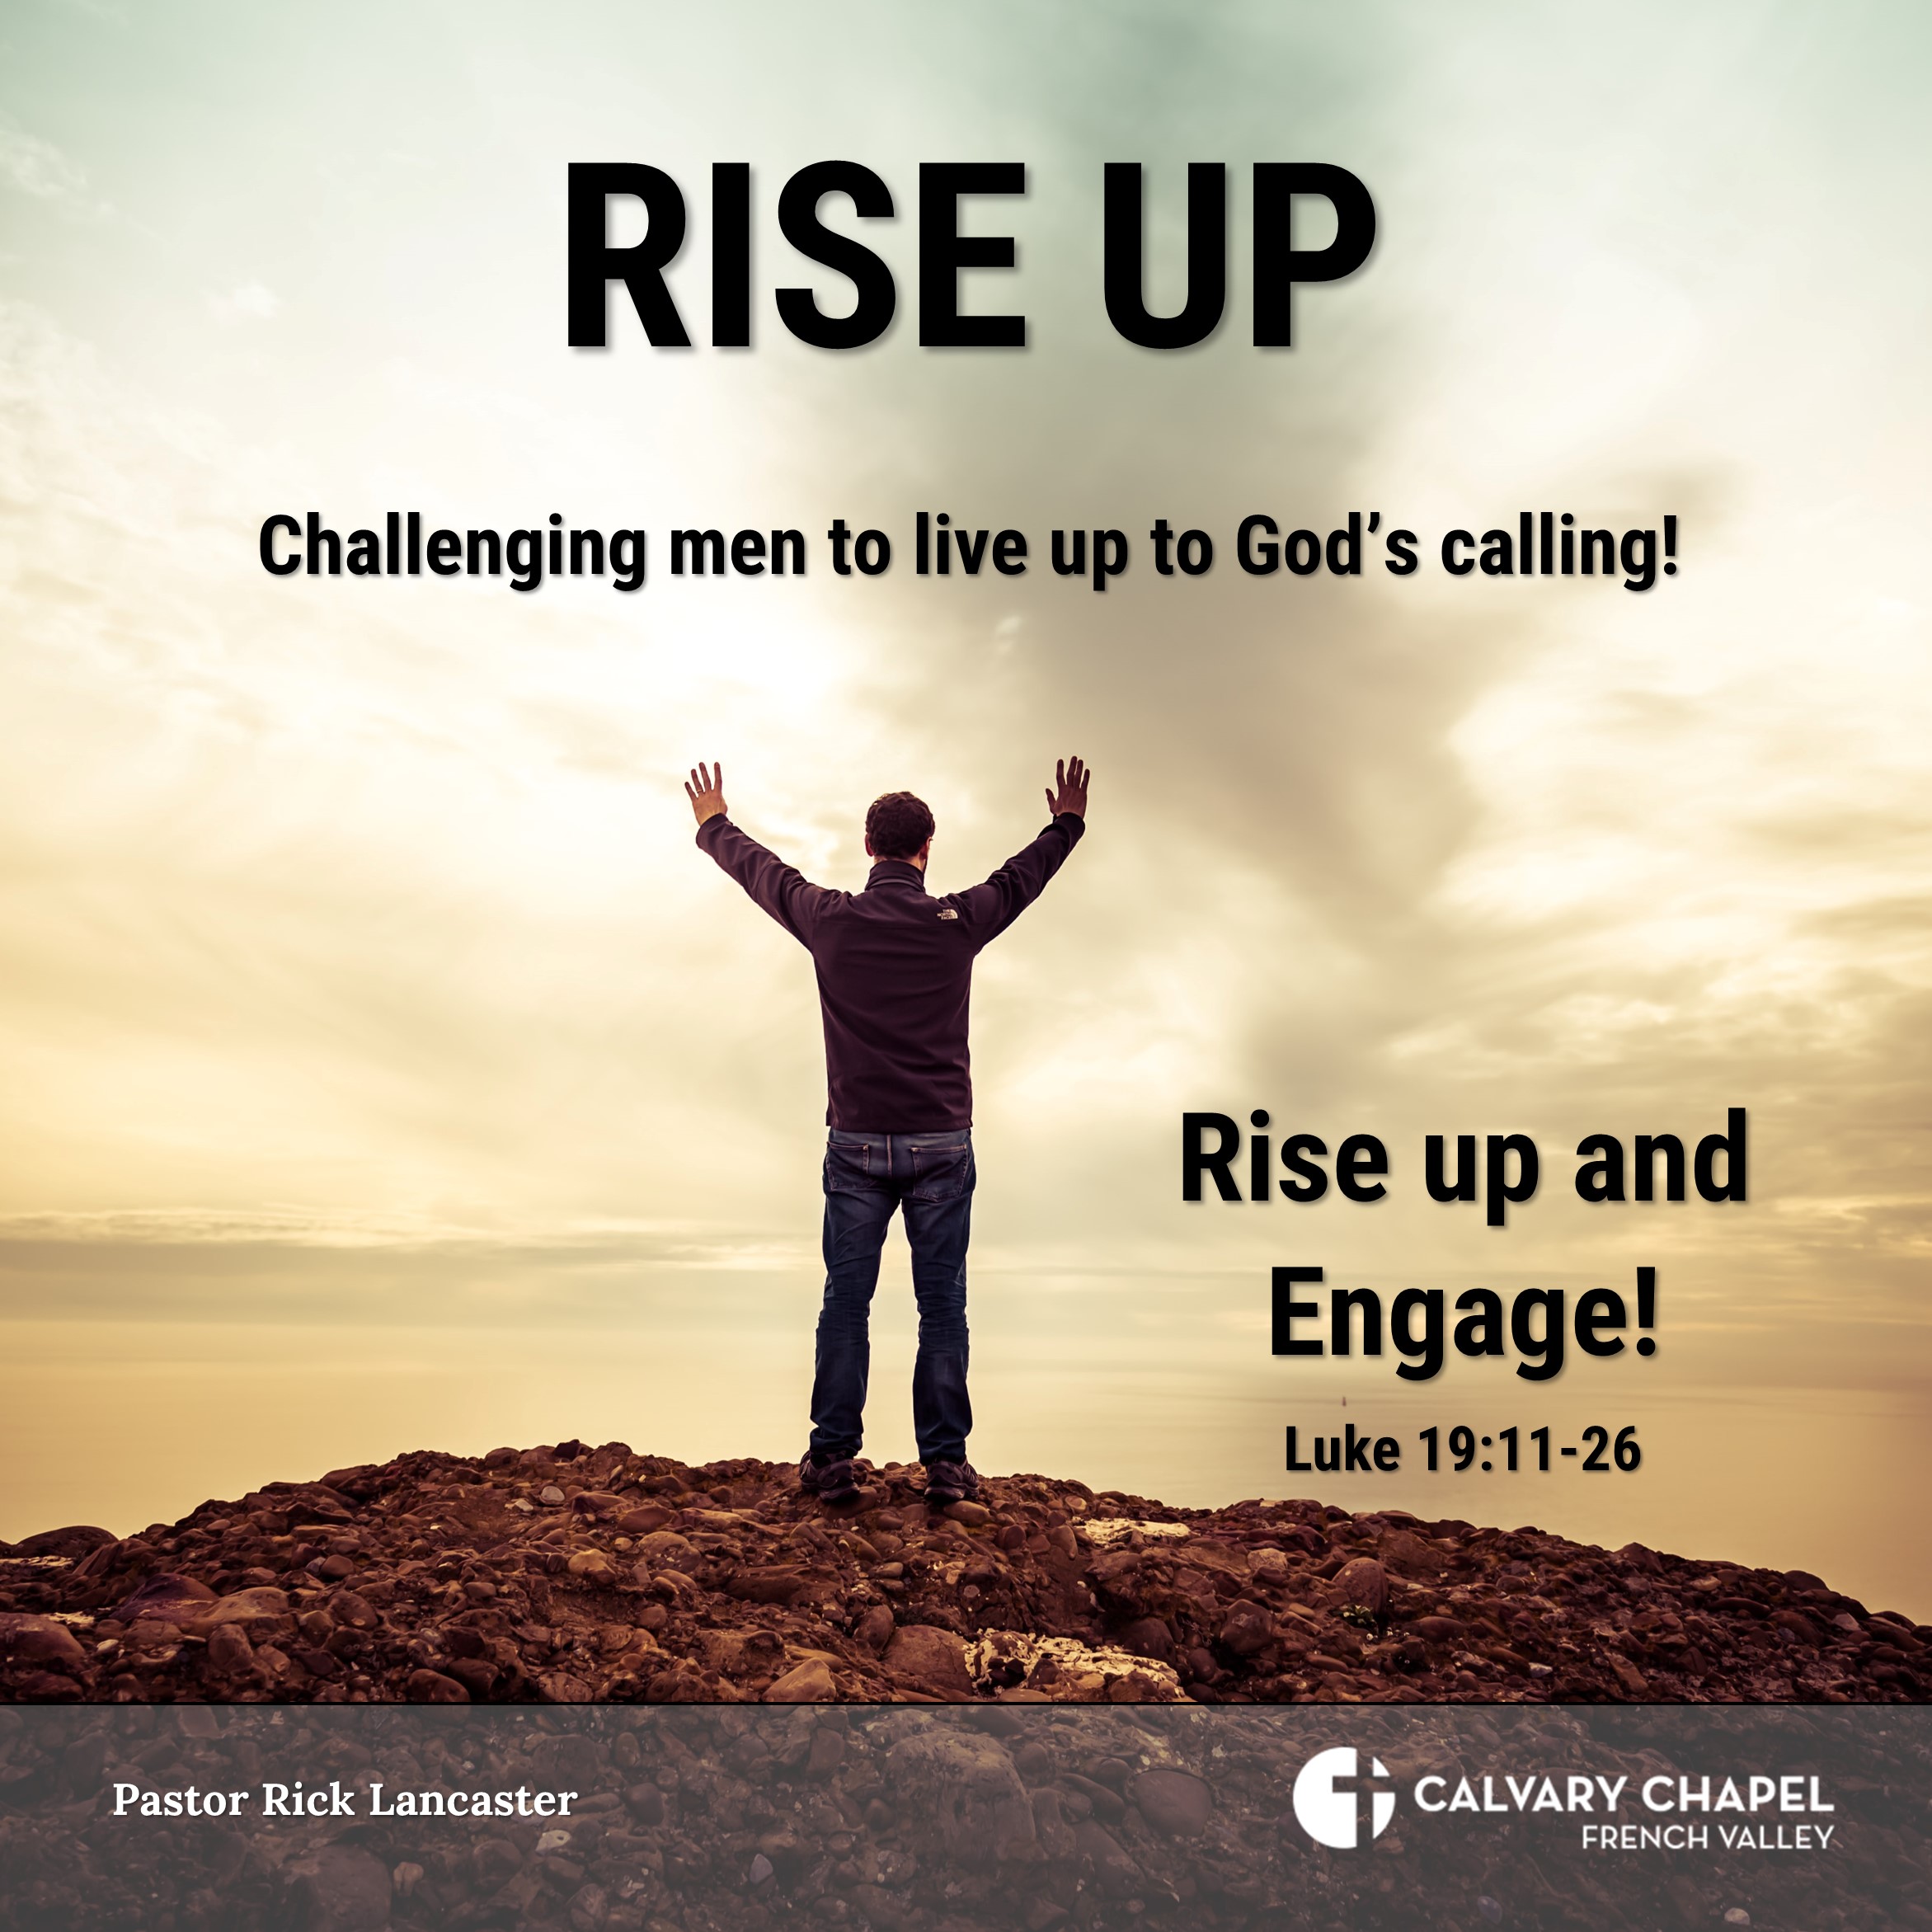 Rise up and engage! Luke 19:11-26 - RISE UP: Challenging men to live up to God’s calling!